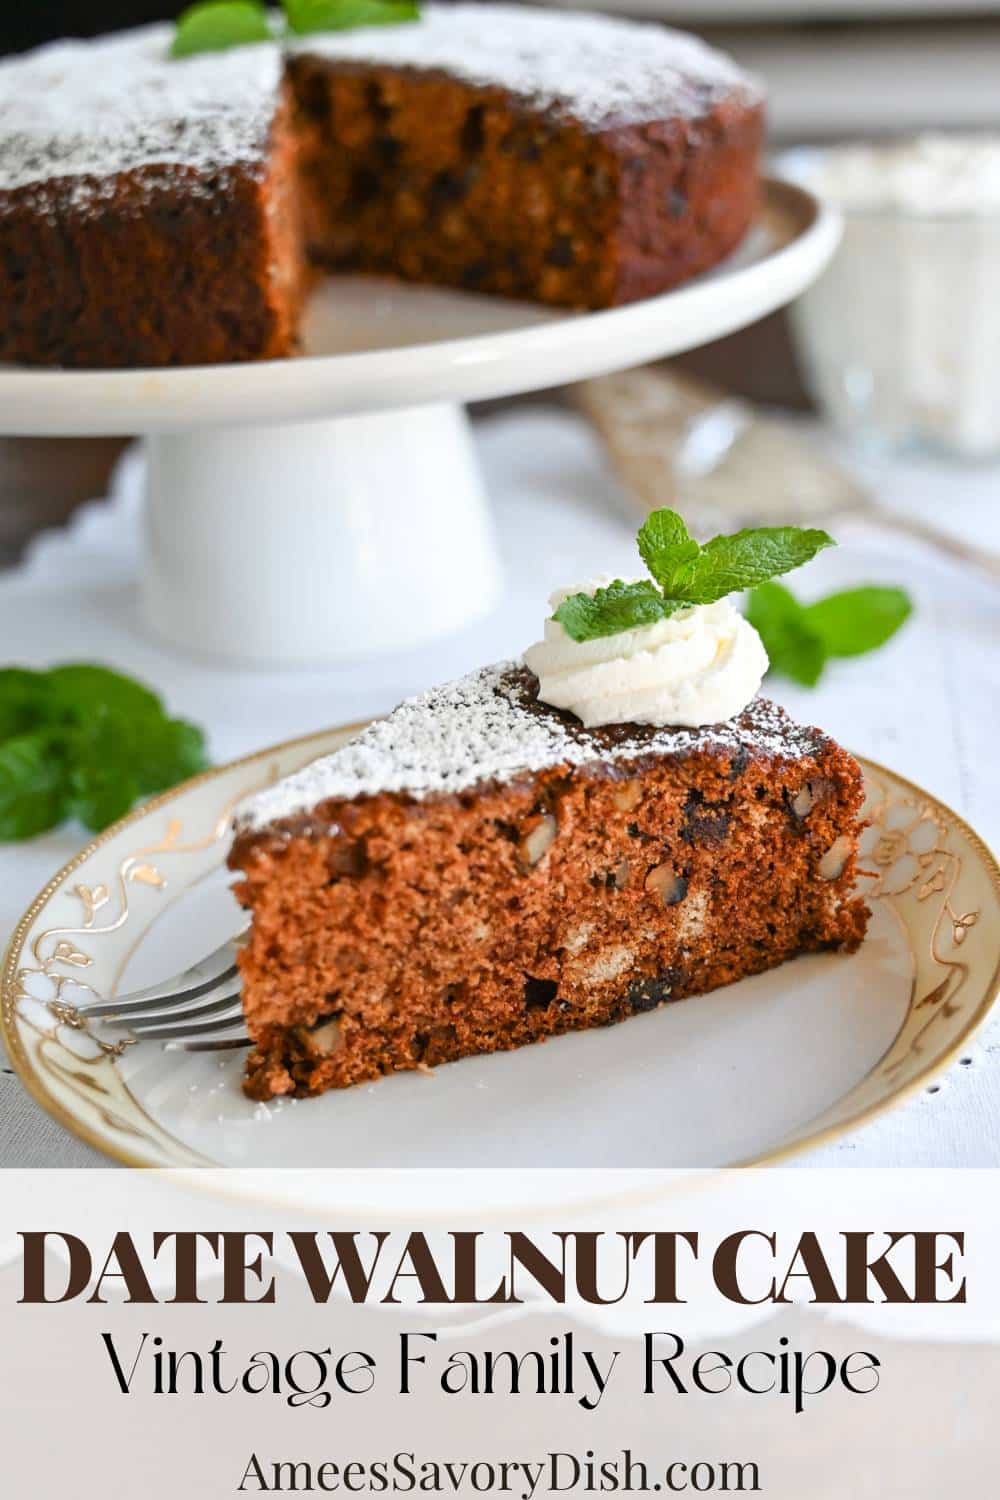 This time-honored dessert brings the richness of dates and the crunchiness of walnuts together in an incredibly moist cake -just like grandma used to make it! via @Ameessavorydish